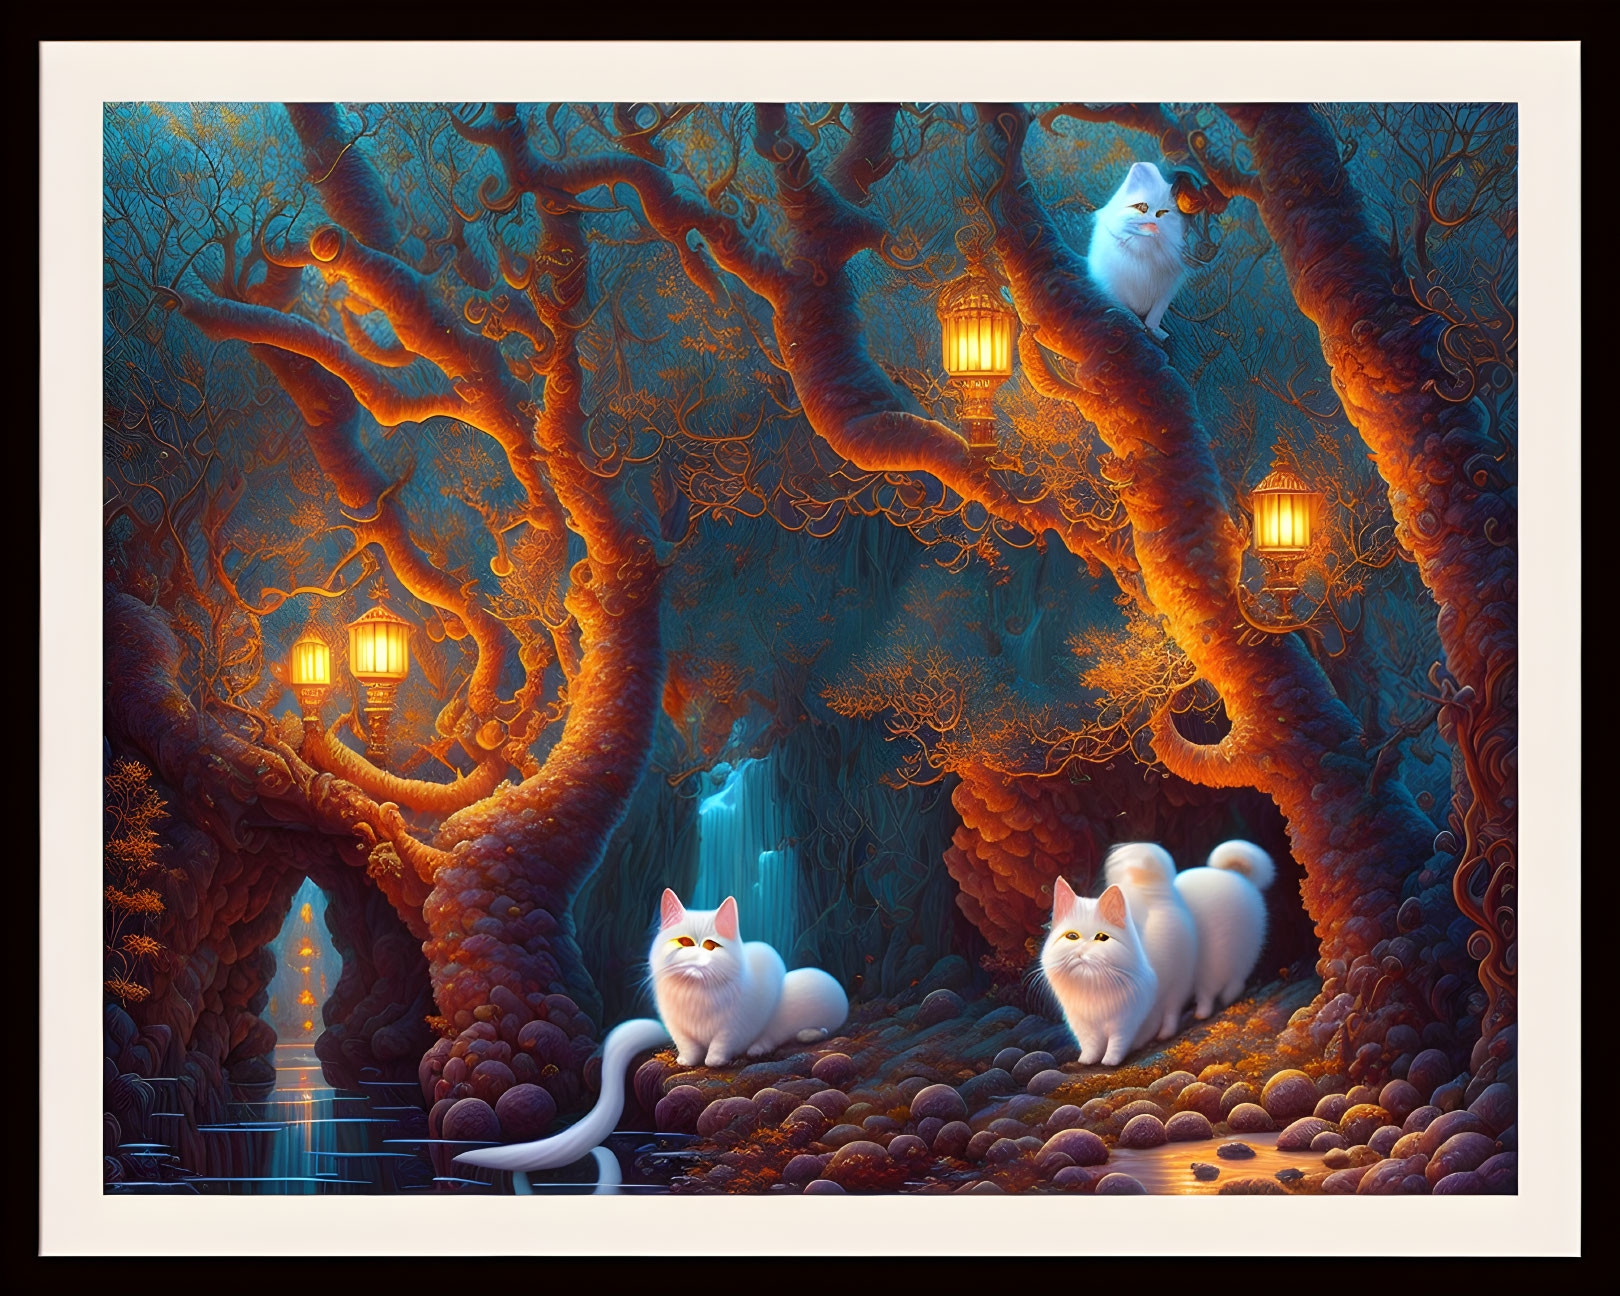 Mystical cats in enchanted forest with lanterns, twisted trees, and waterfall